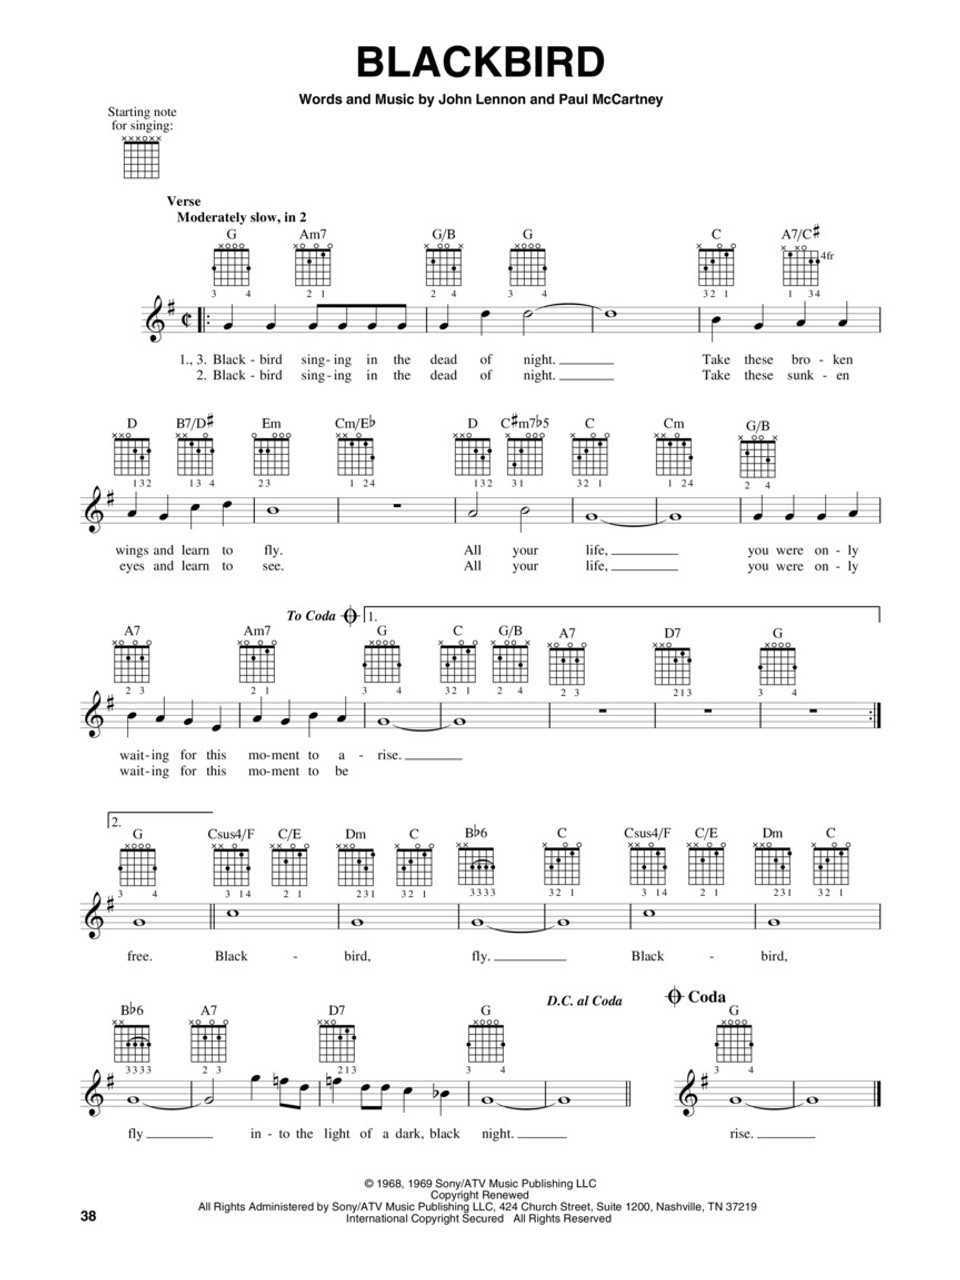 More Easy Pop Melodies Songbook (Third Edition) - Class Guitar Resources